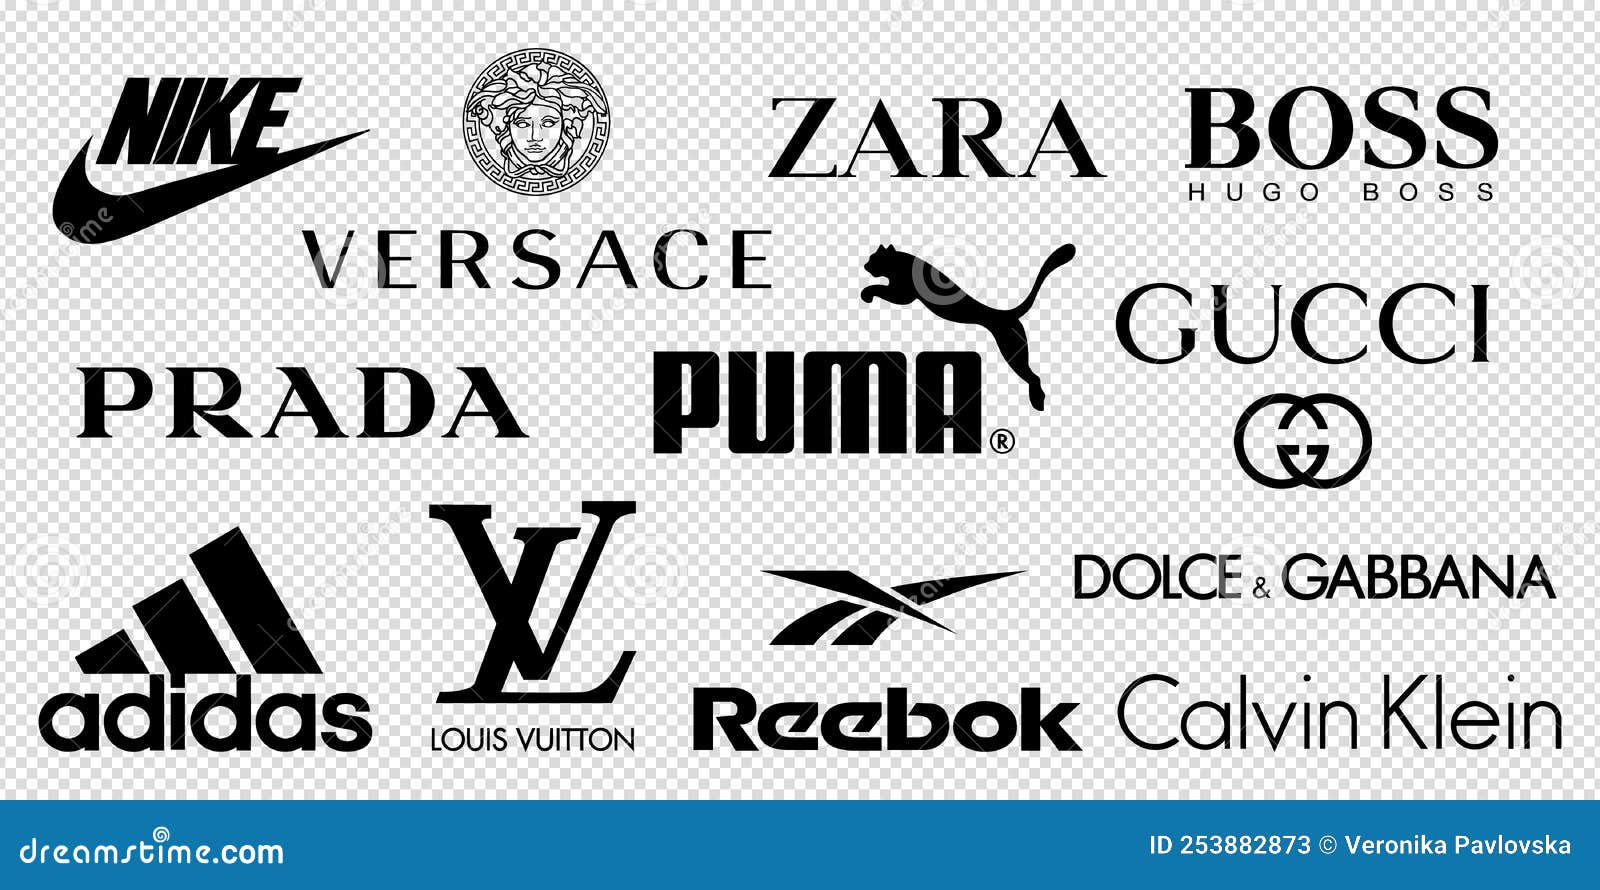 Clothes brand